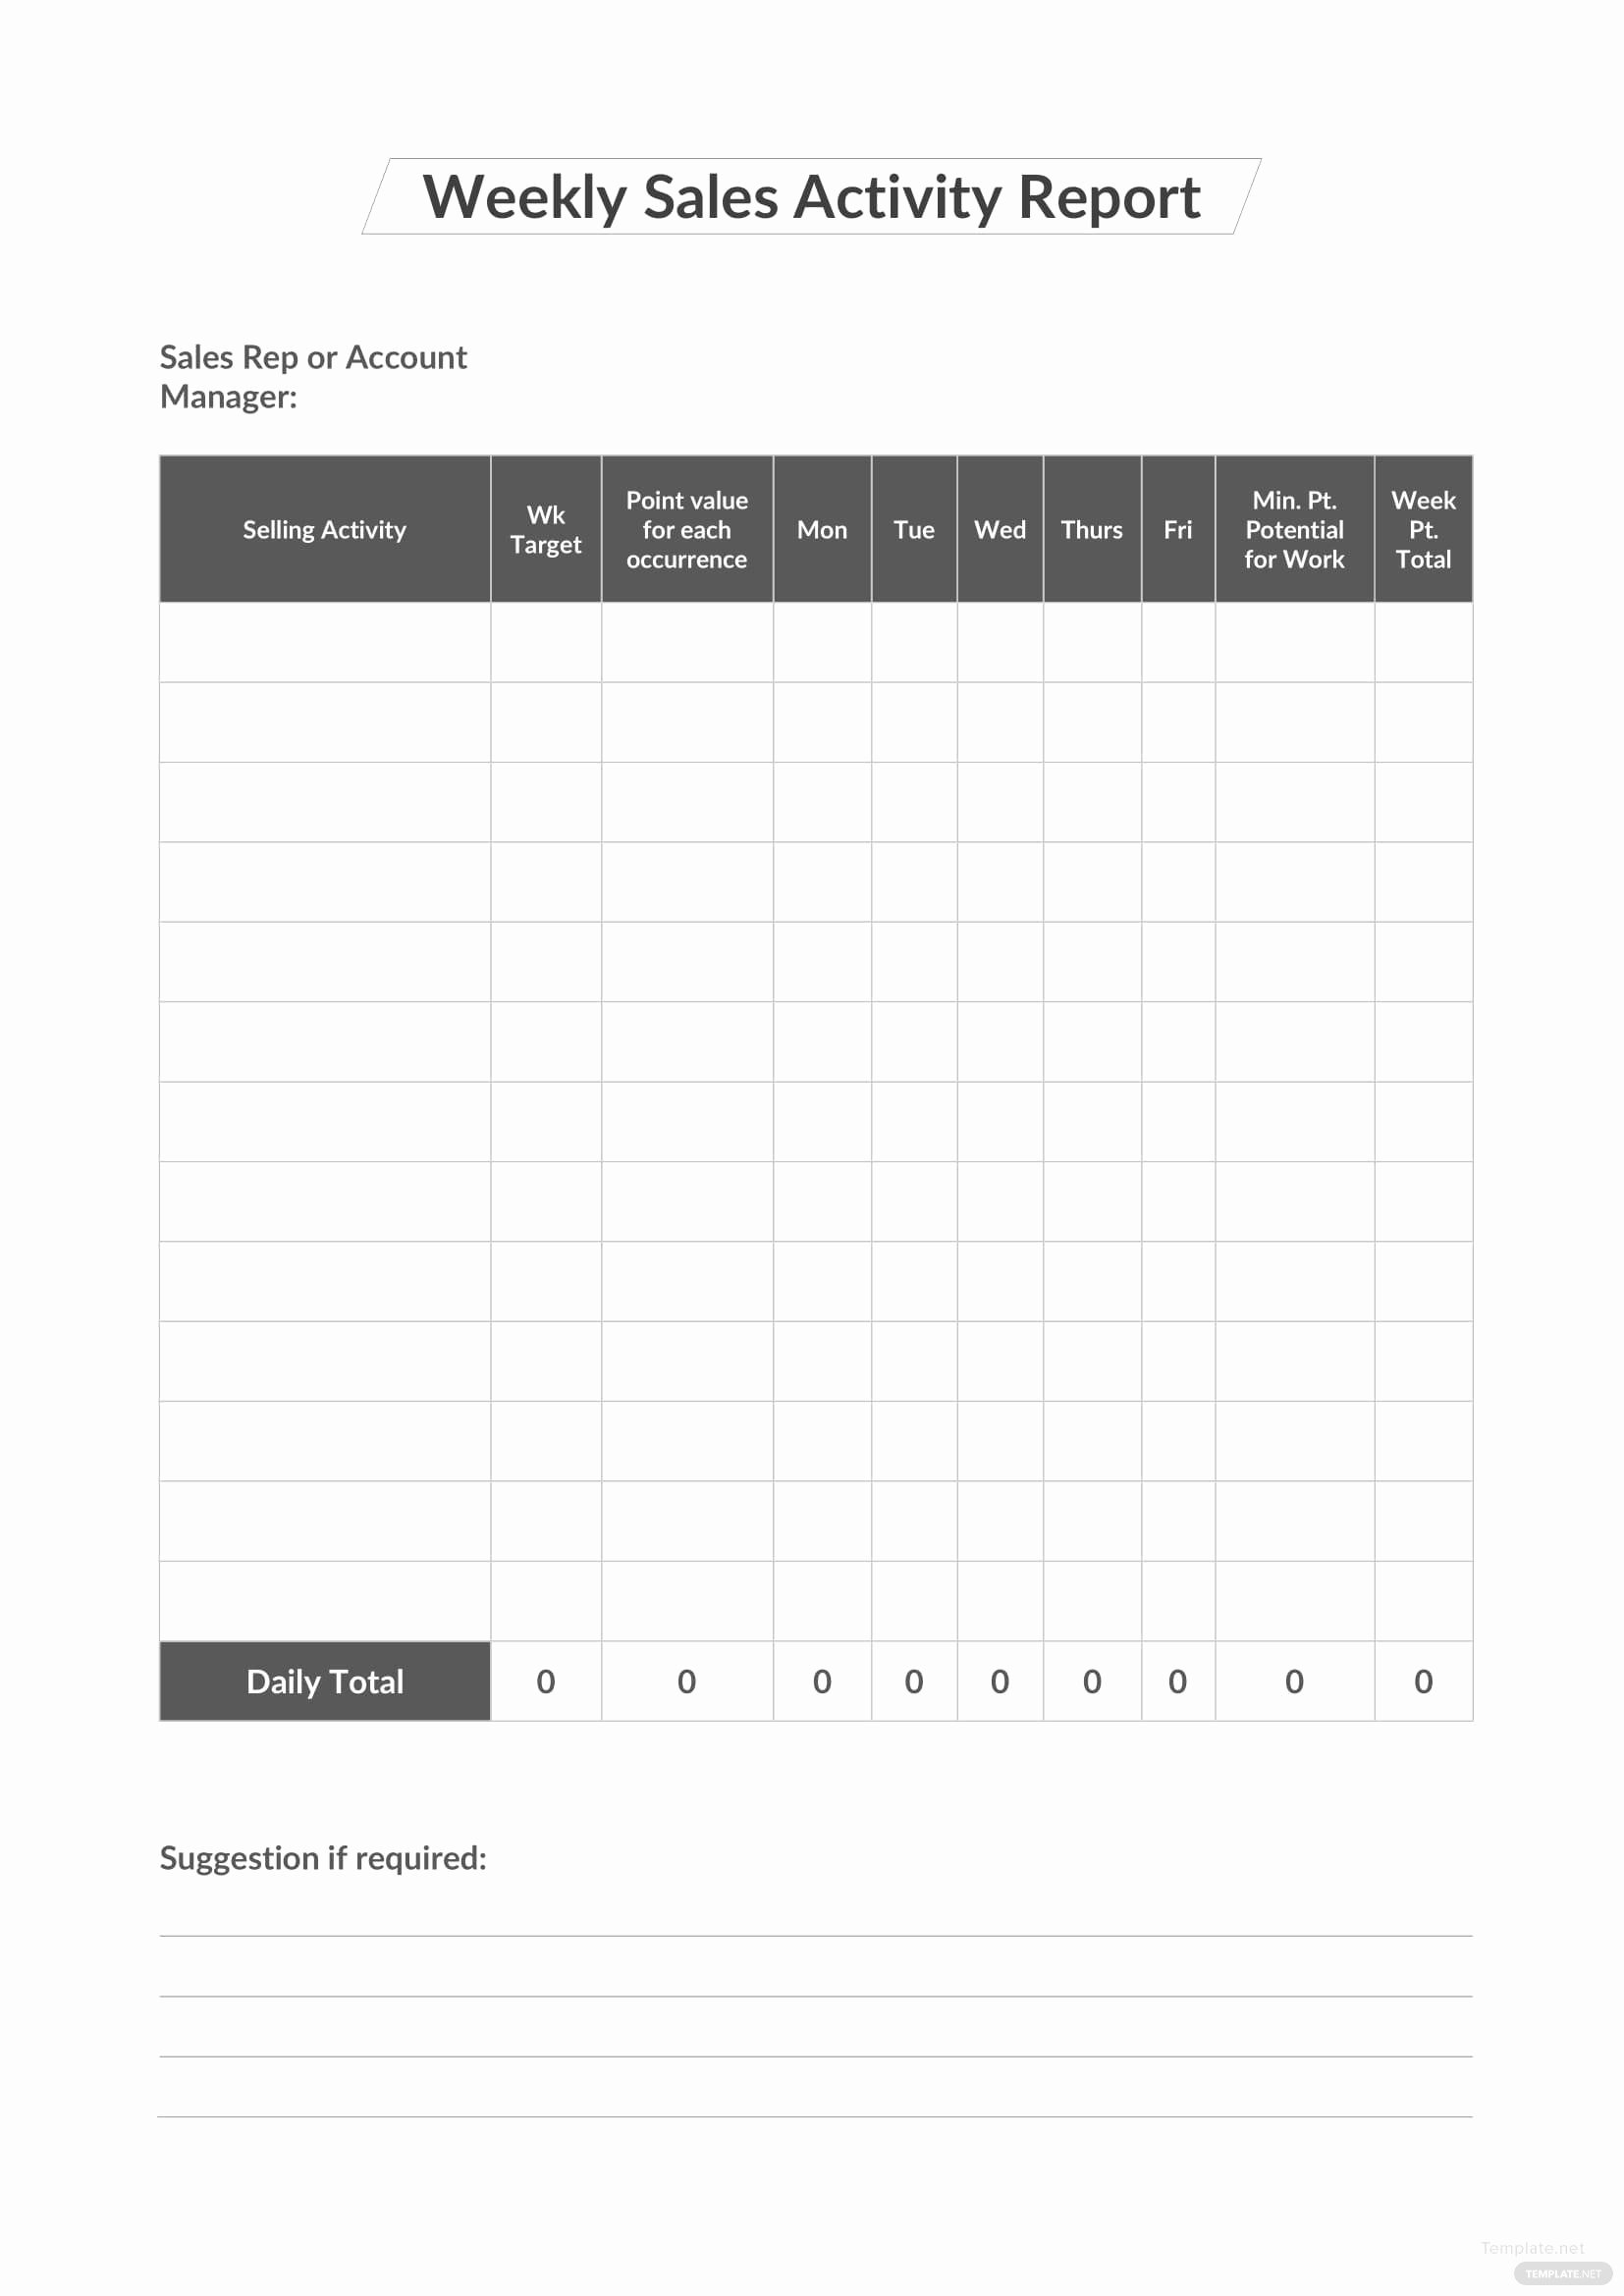 Sales Activity Report Template New Weekly Sales Activity Report Template In Microsoft Word